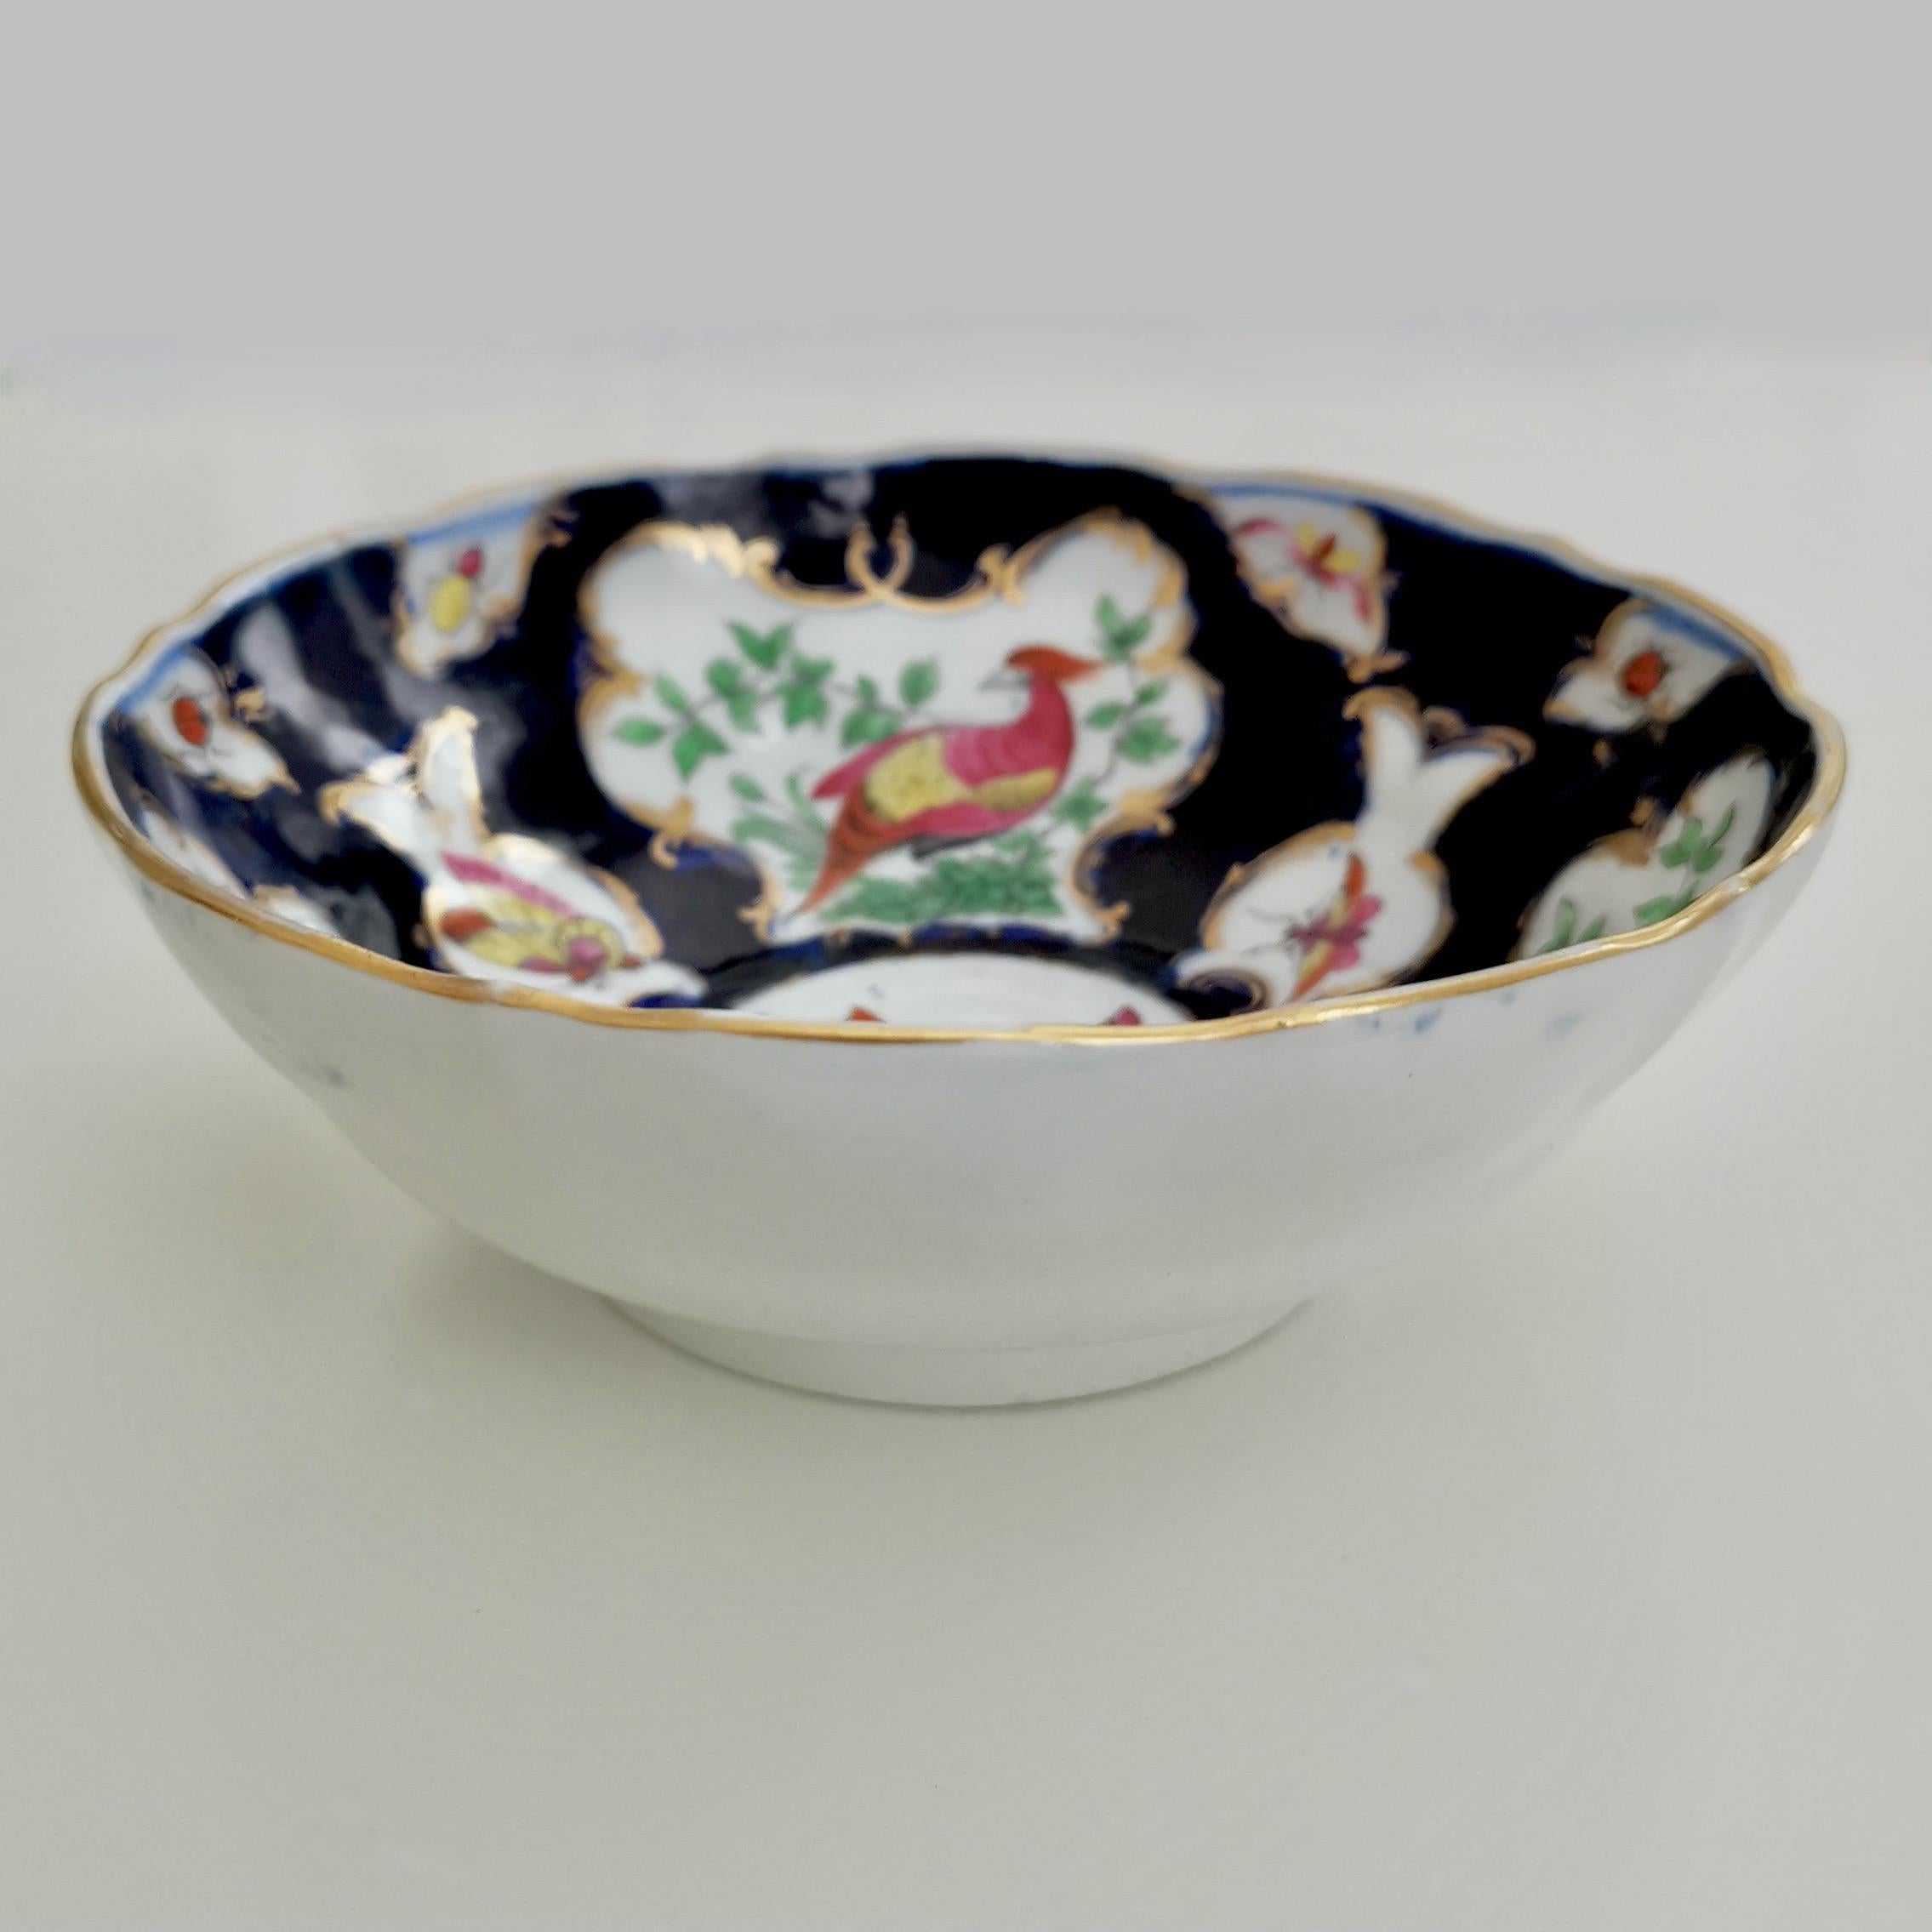 This is a beautiful small bowl made by Edmé Samson in Paris some time in the 19th Century. The bowl is in the 'blue scale' style that the Worcester factory made in the 18th century, and carries a fake Worcester fret mark.
 
This bowl might in fact